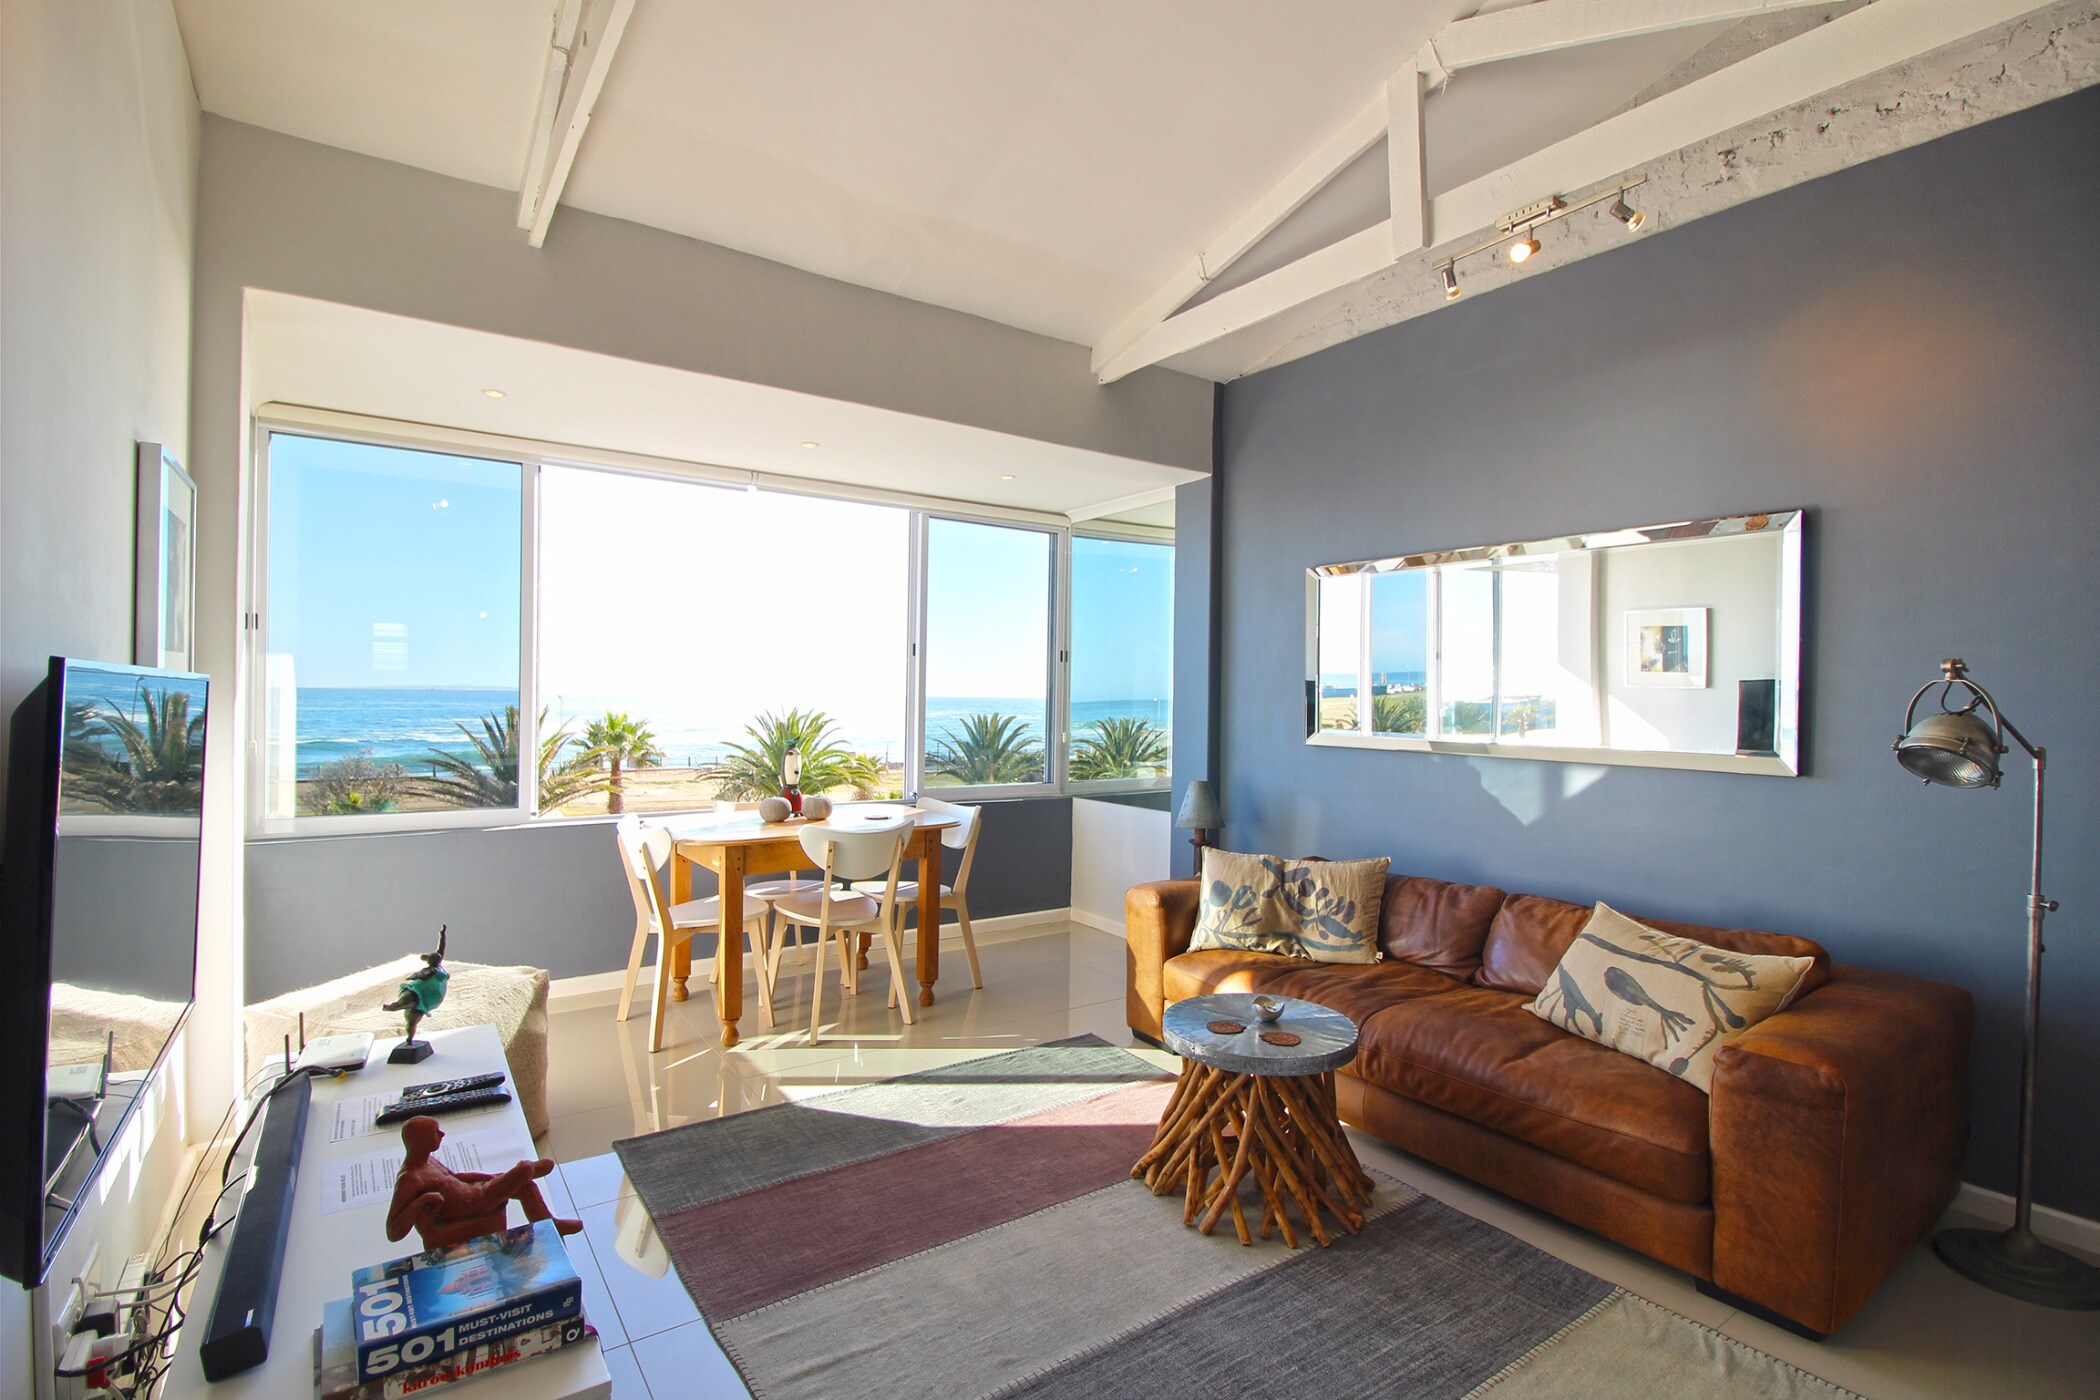 Property Image 2 - Beautiful  Stylish Beachfront with Gorgeous Views of the Ocean